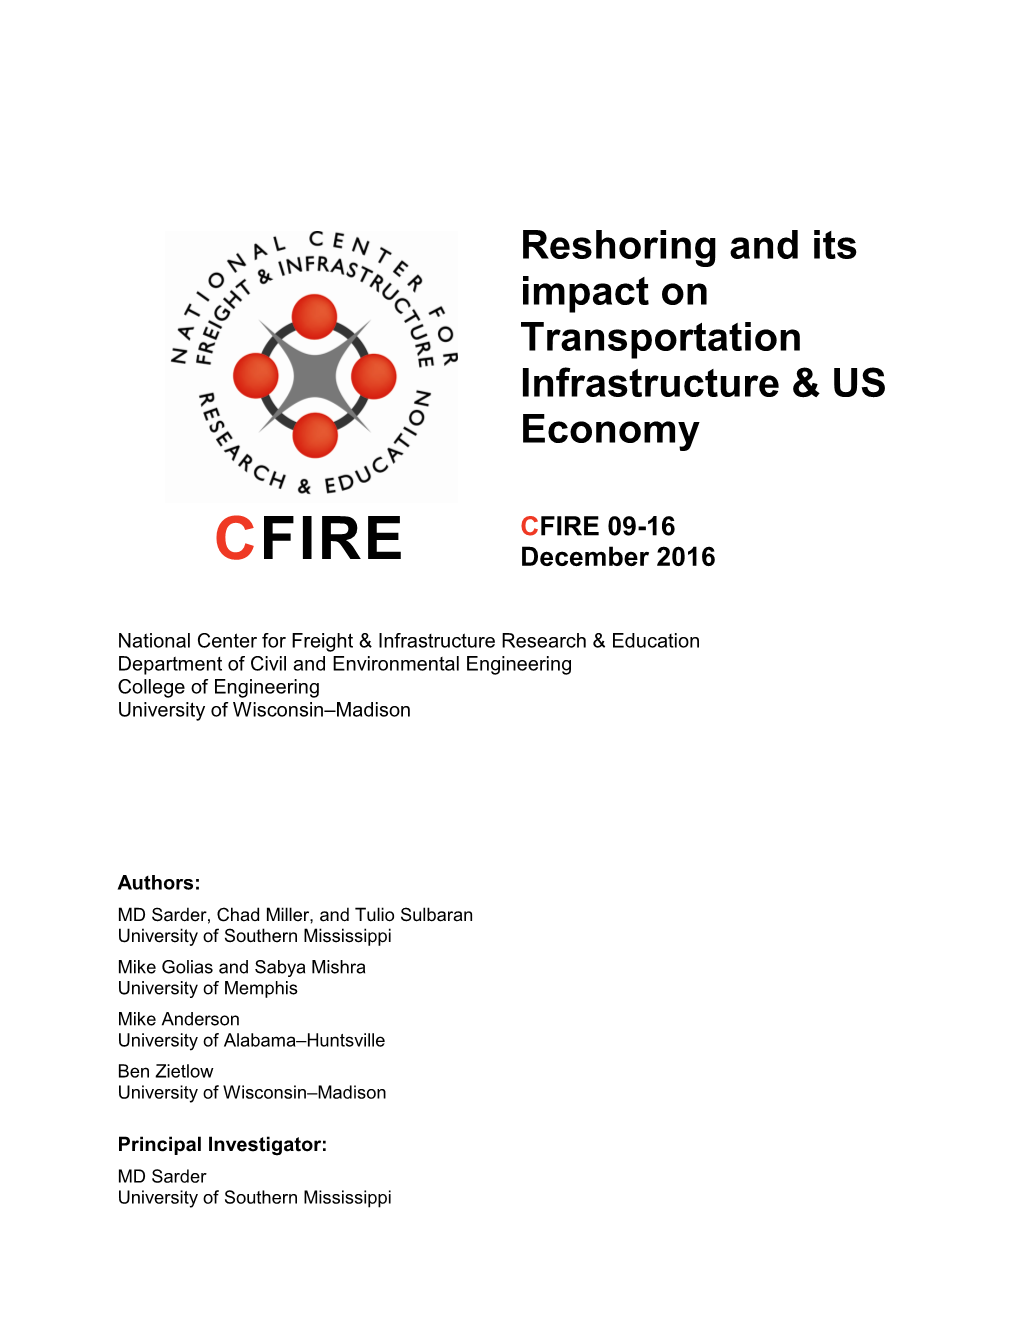 Reshoring and Its Impact on Transportation Infrastructure & US Economy